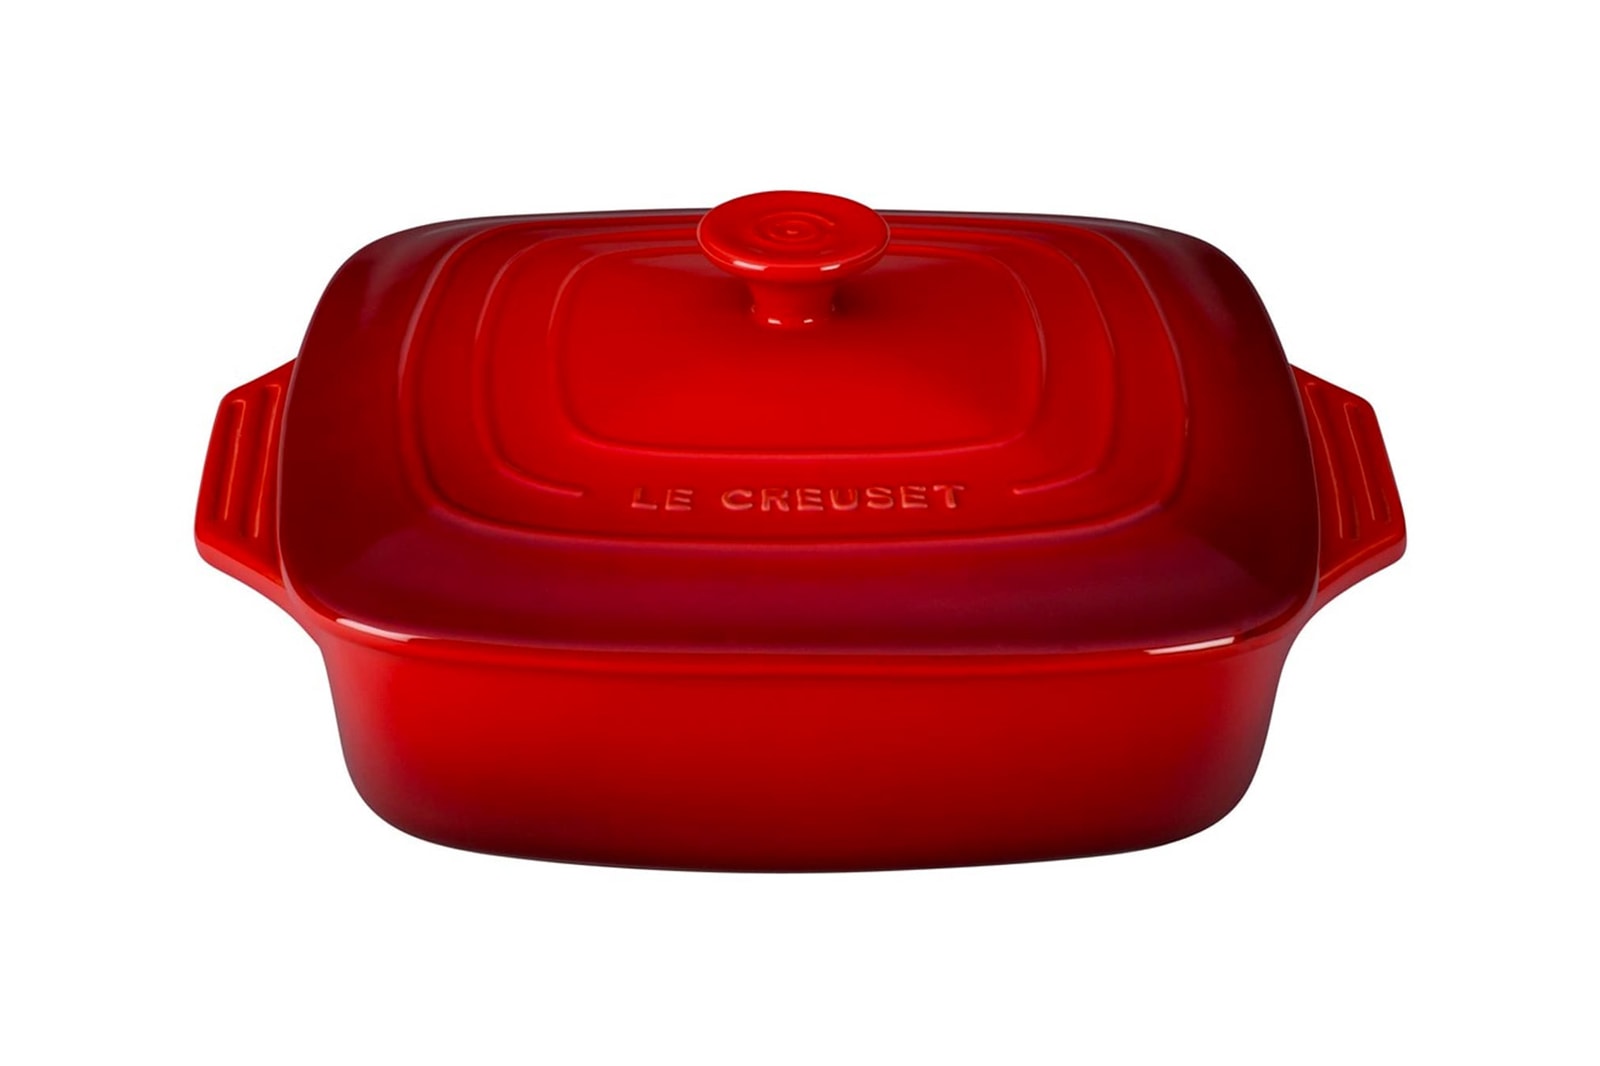 best cookware stylish chic kitchen cooking nonstick pots pans chopping boards le creuset caraway staub hay 